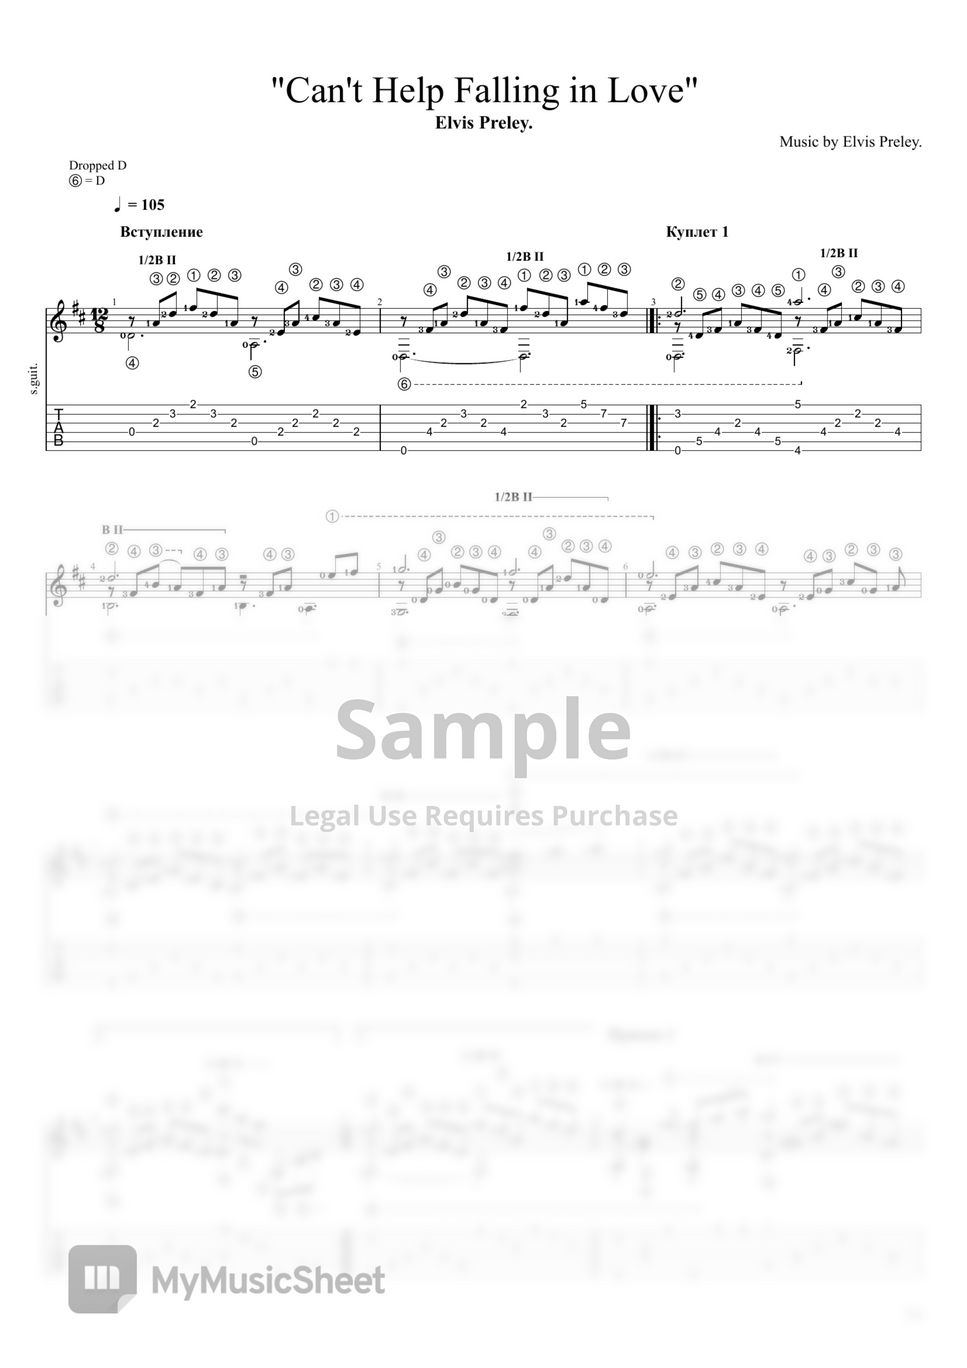 Musical compositions - "Beautiful guitar music" by Roman Chernov.